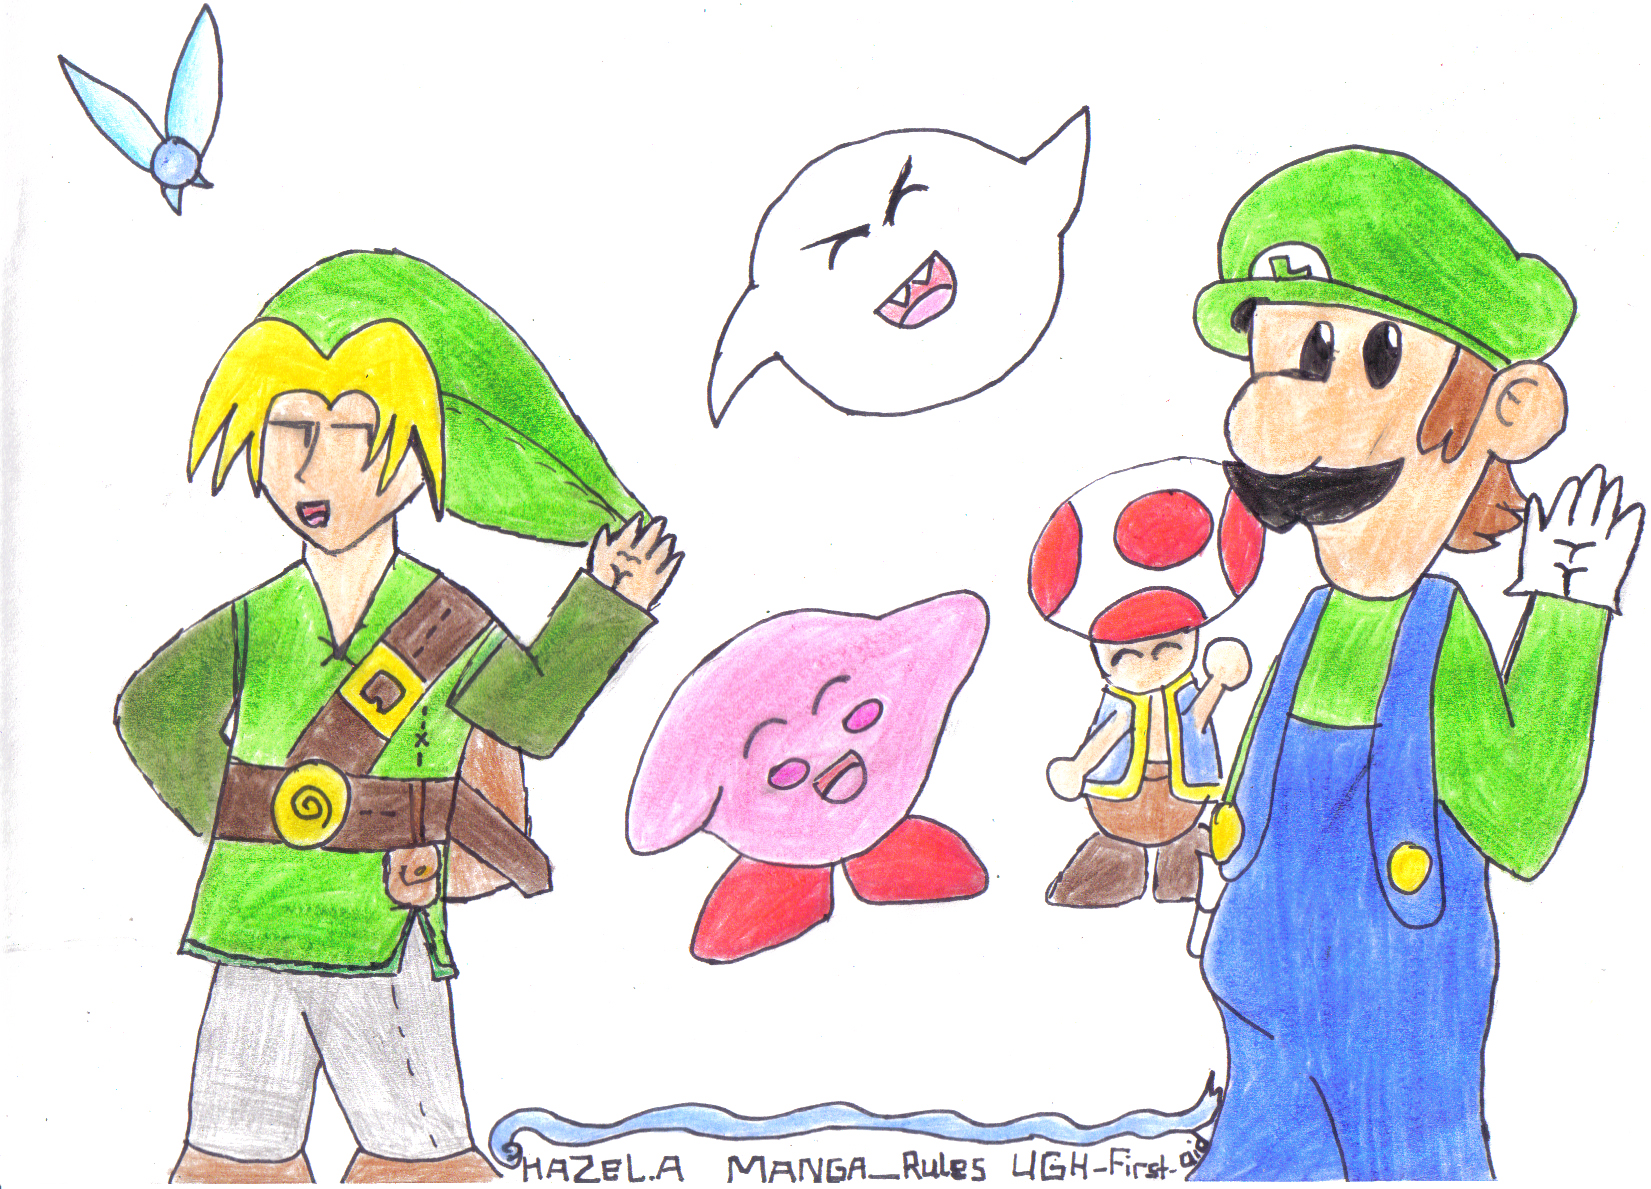 A Typical Nintendo Hello by manga_rules